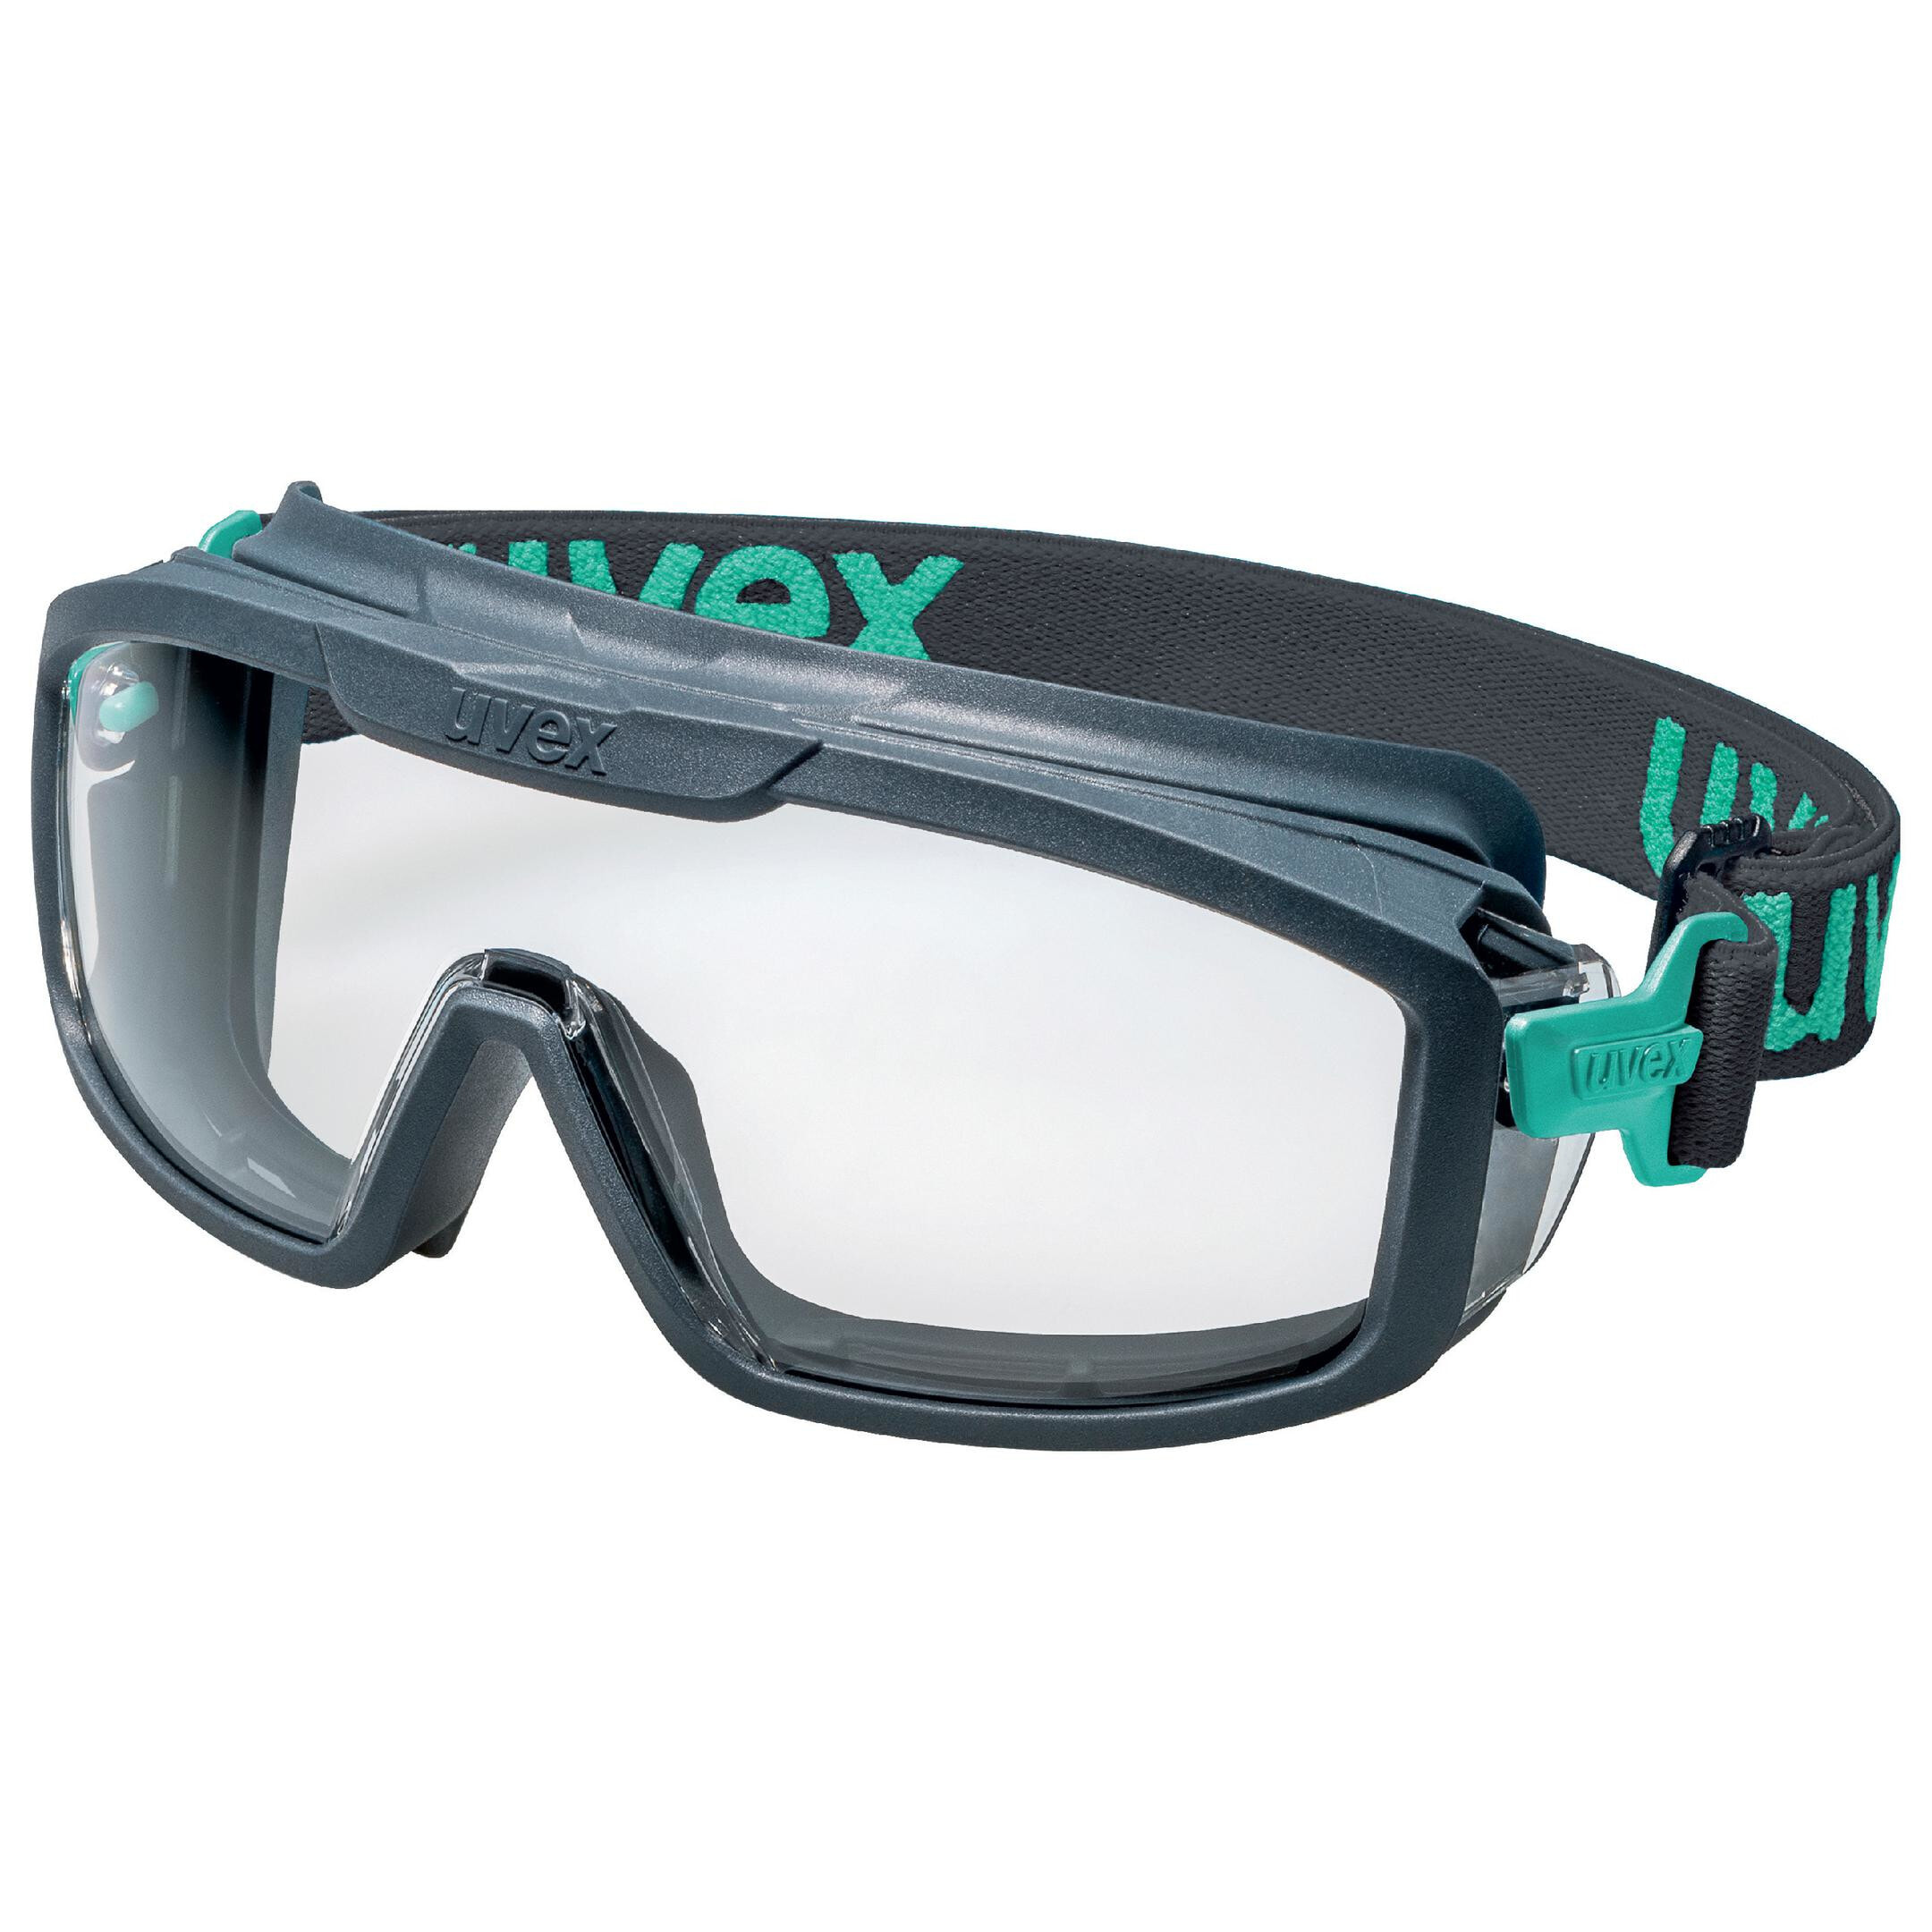 UVEX Arbeitsschutz i-guard+ - Safety goggles - Any gender - Black - Blue - Transparent - Polycarbonate (PC) - Polycarbonate